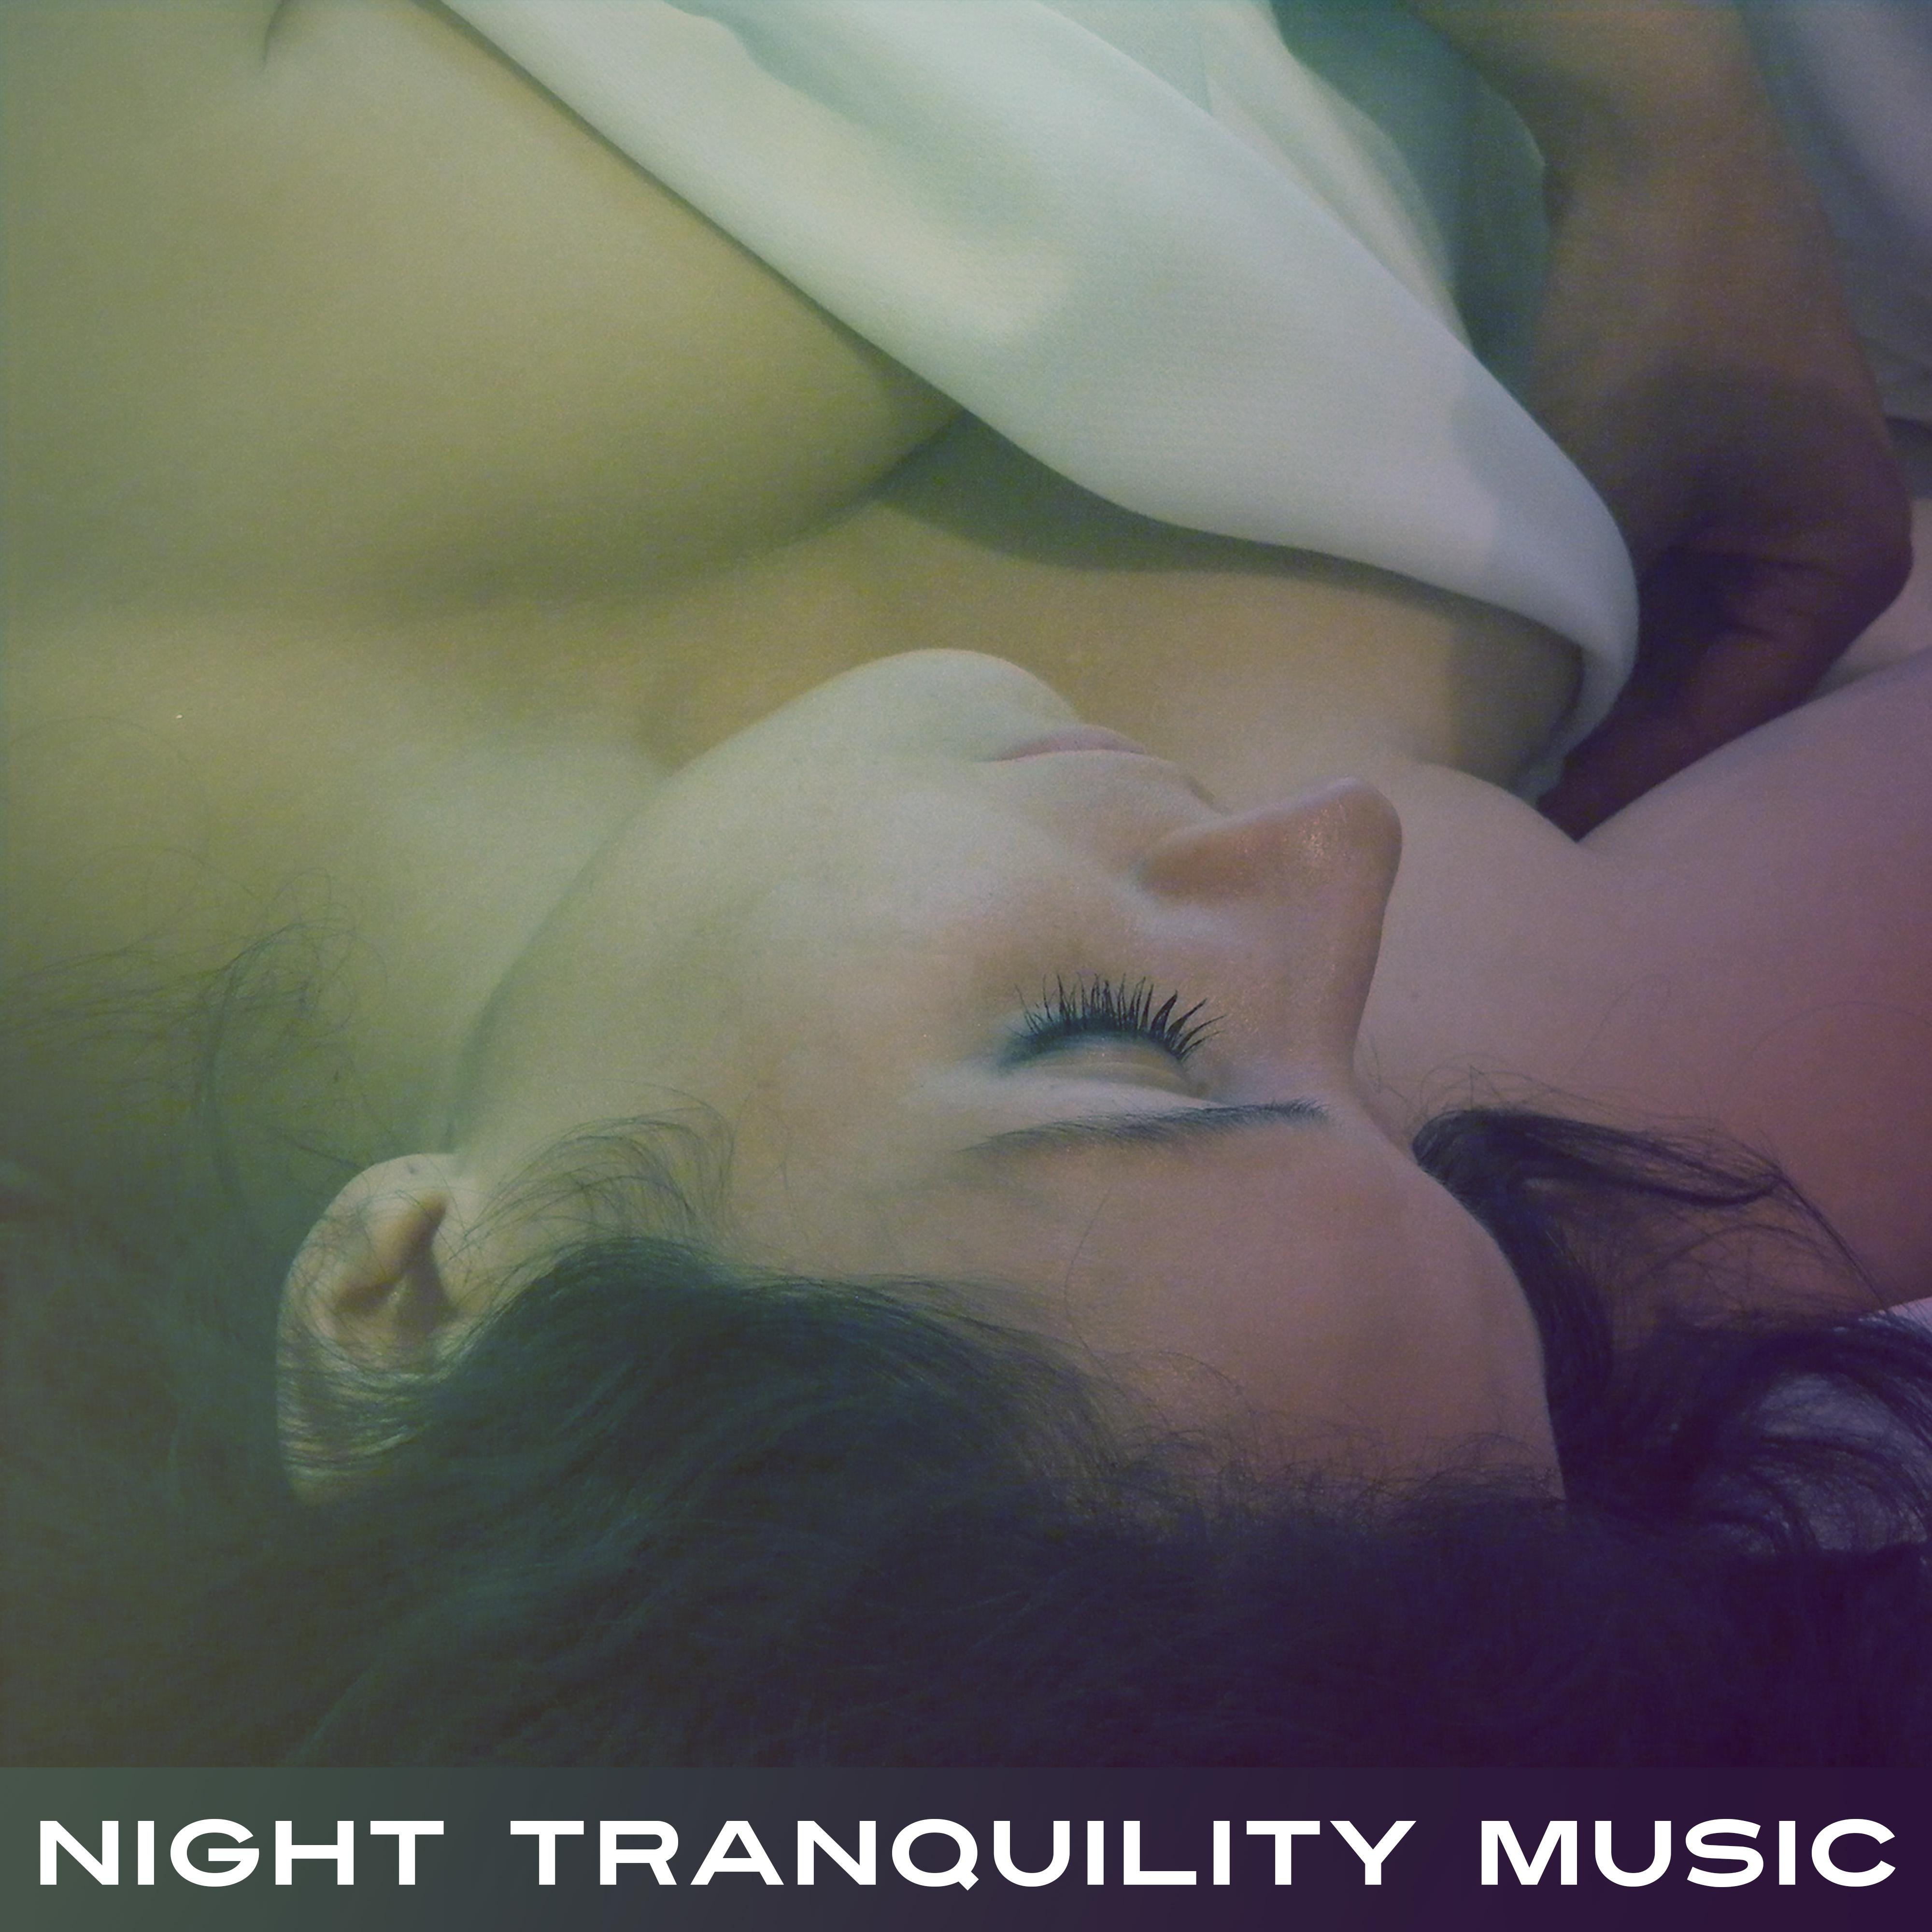 Night Tranquility Music – Calm Music for Sleeping, Sleep Well, New Age Ambient Dreaming